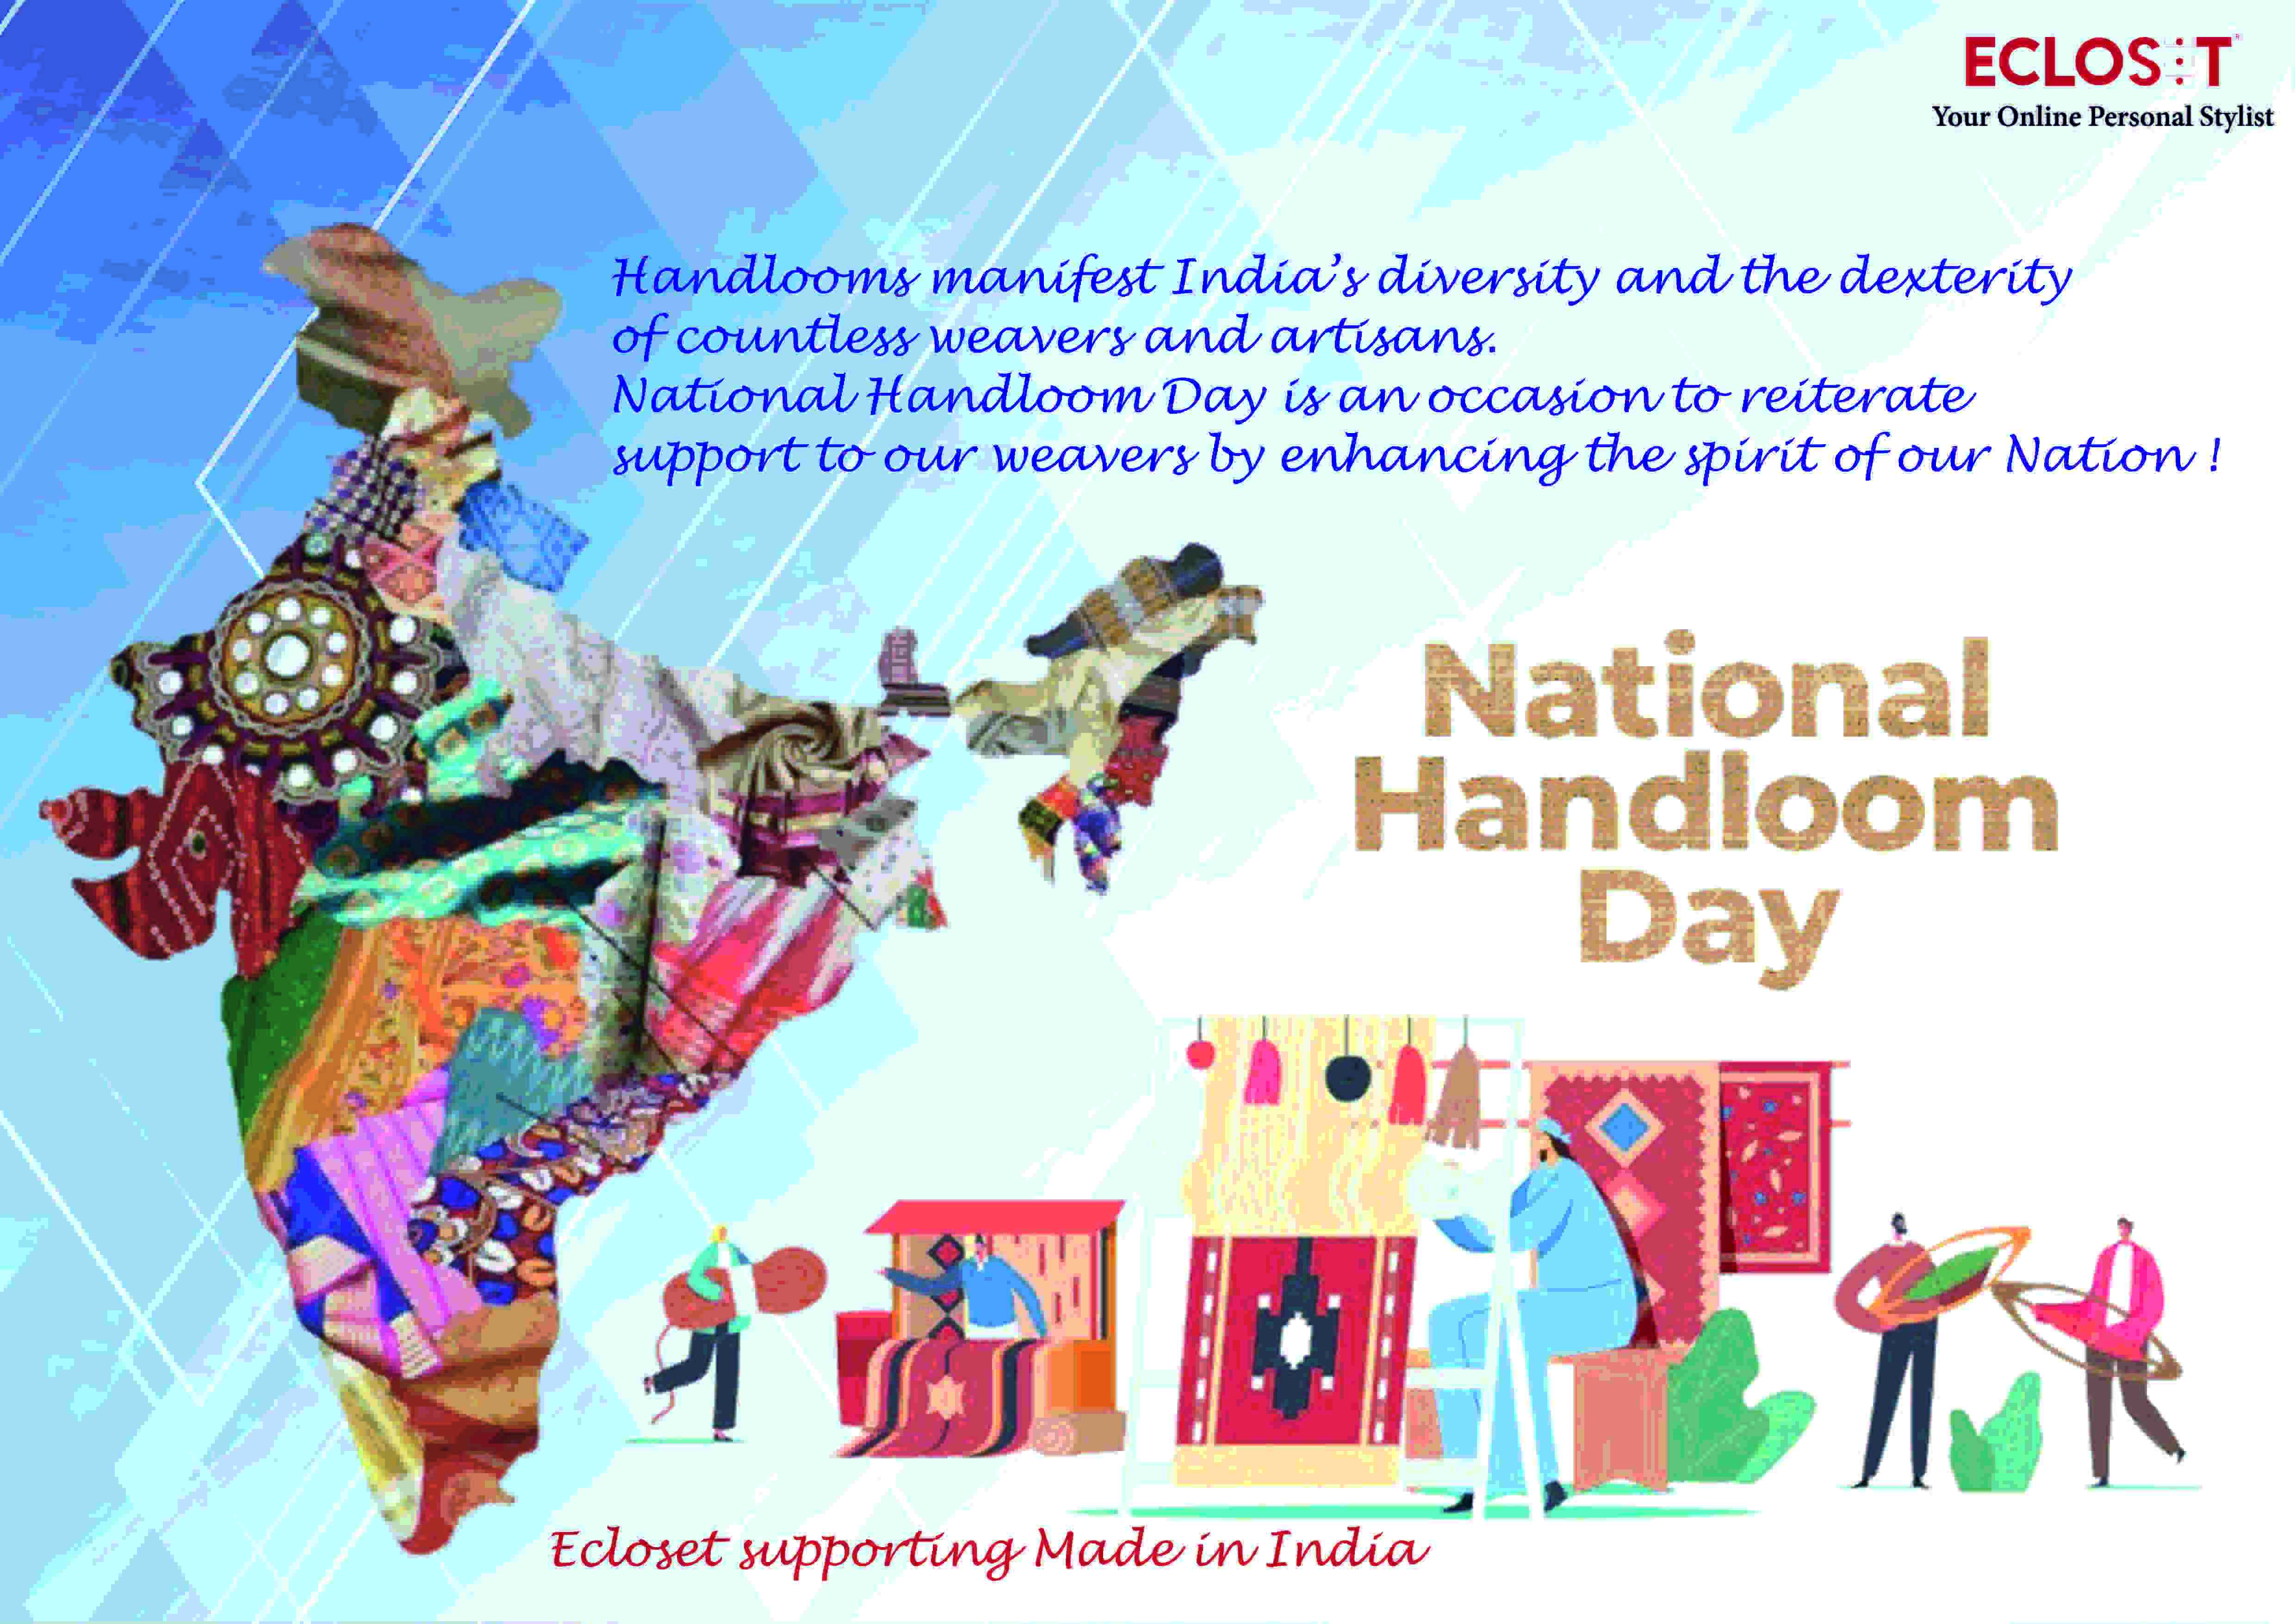 National Handloom Day August 7th